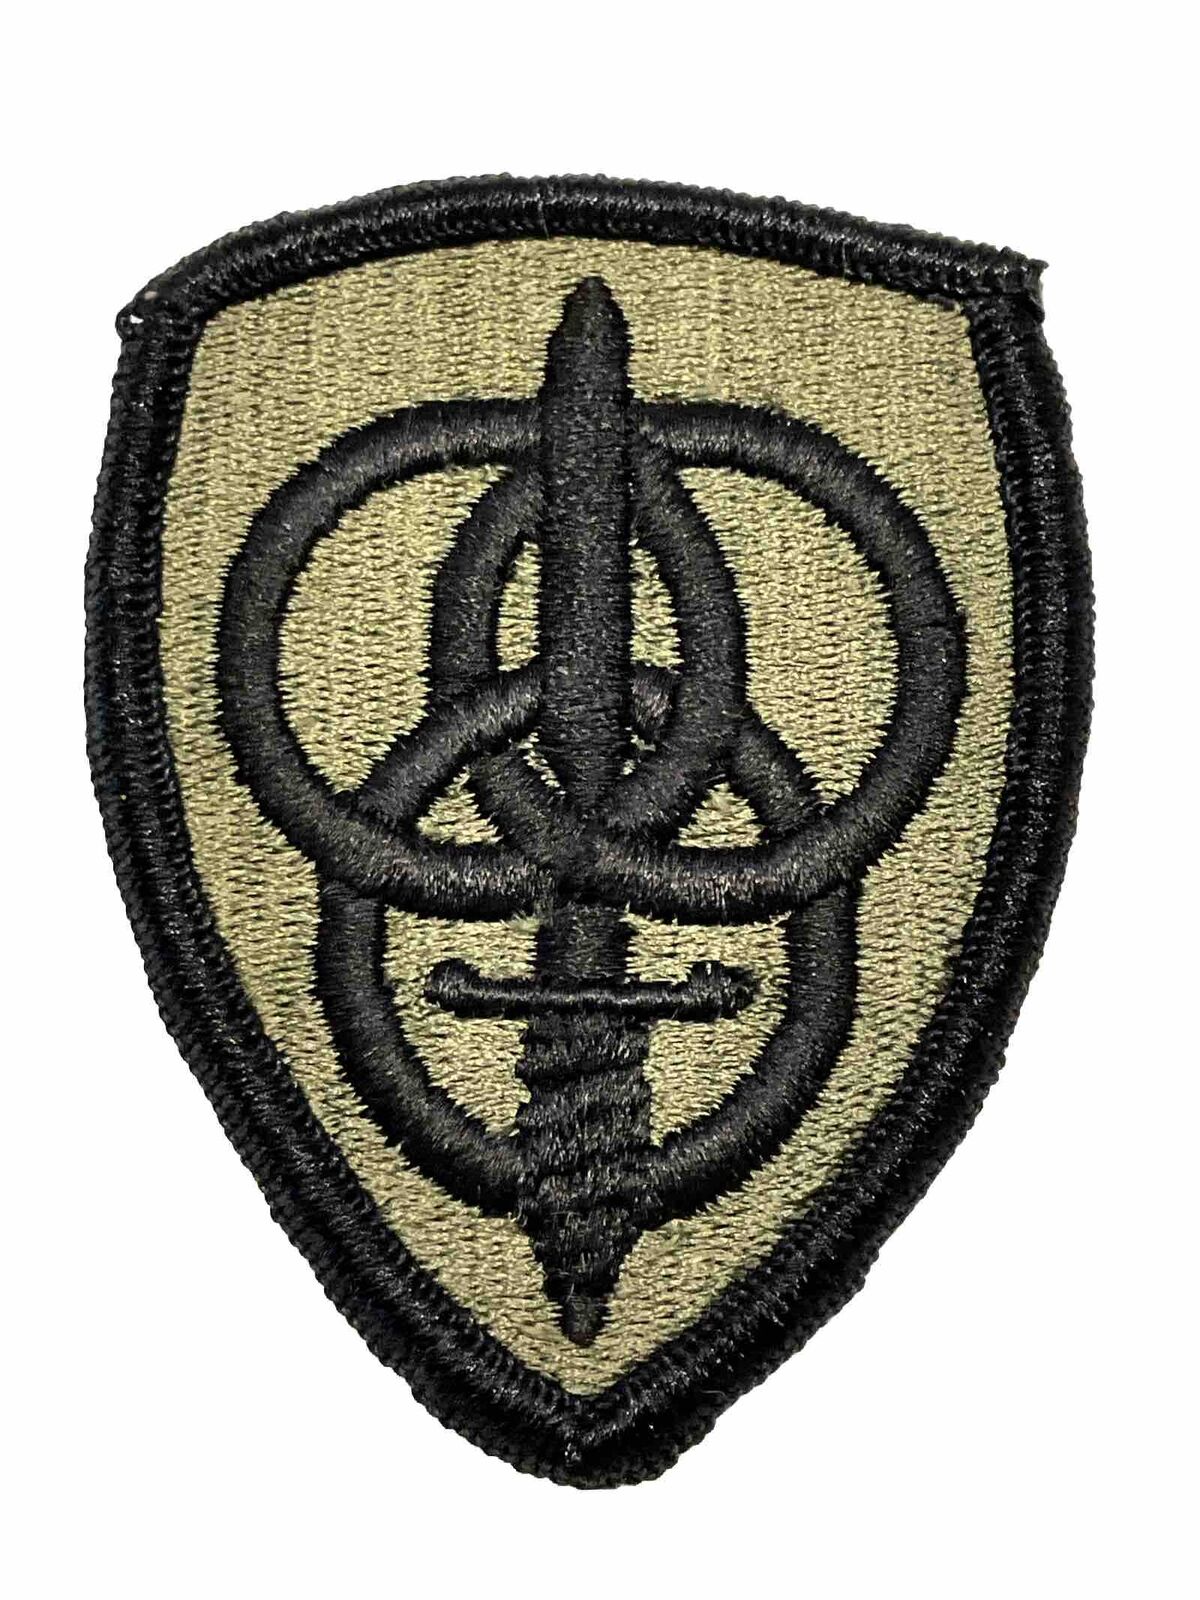 Original U.S. Army 3rd Personnel Command Subdued Merrowed Edges Patch GB